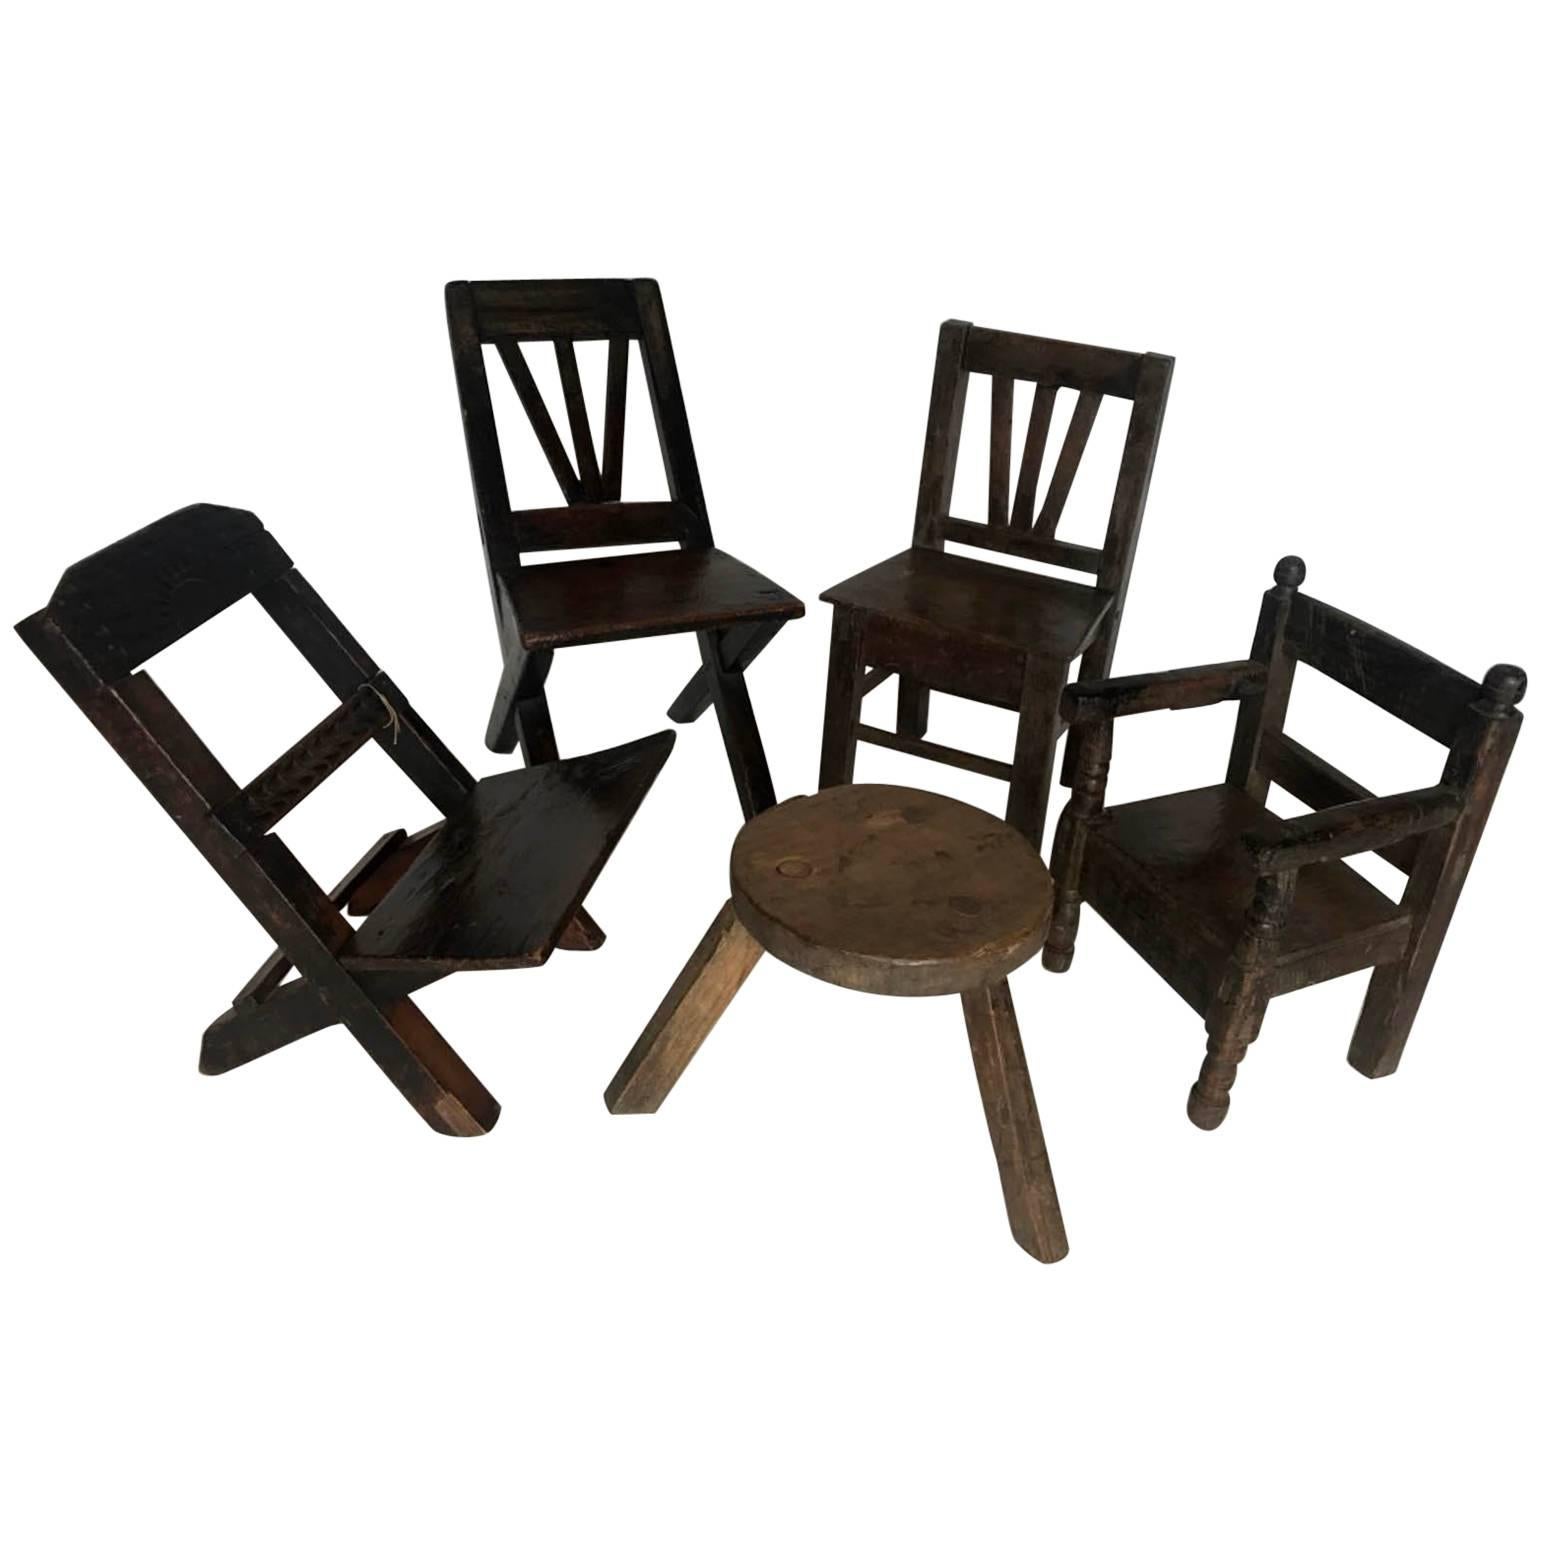 Collection of Vintage Kid's Chairs and Stool